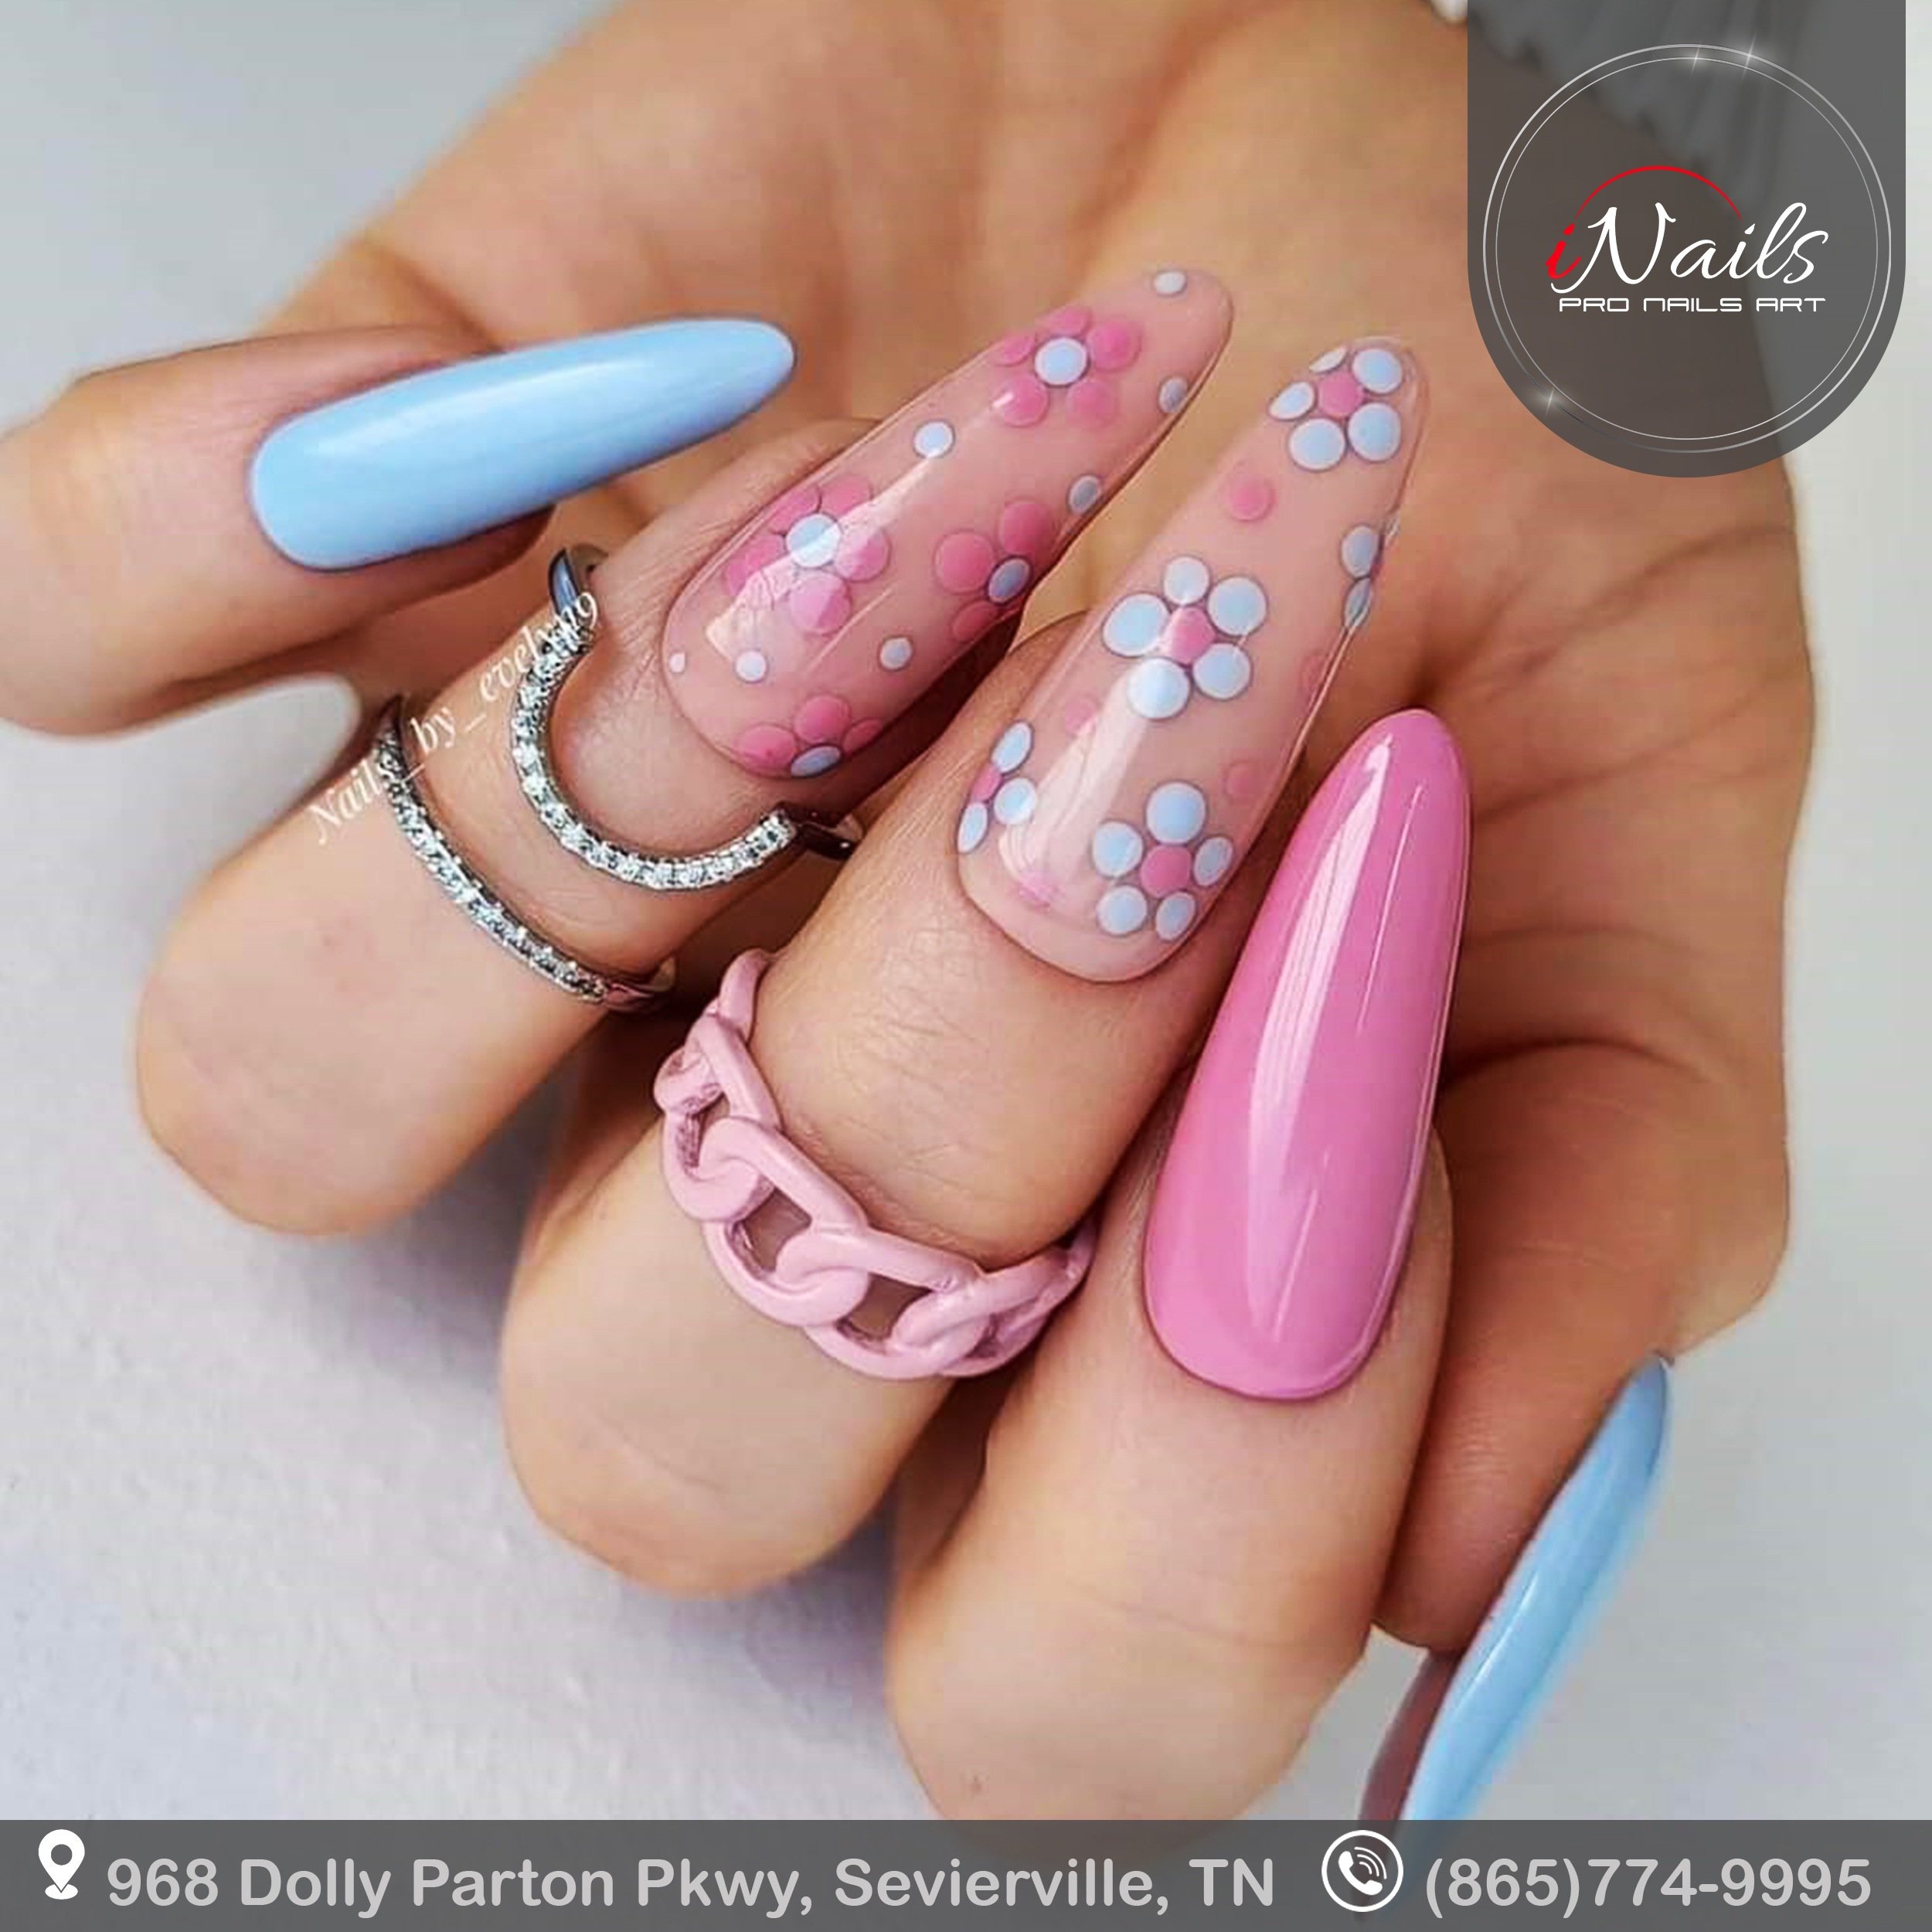 Spring nails inails Sevierville jhdds